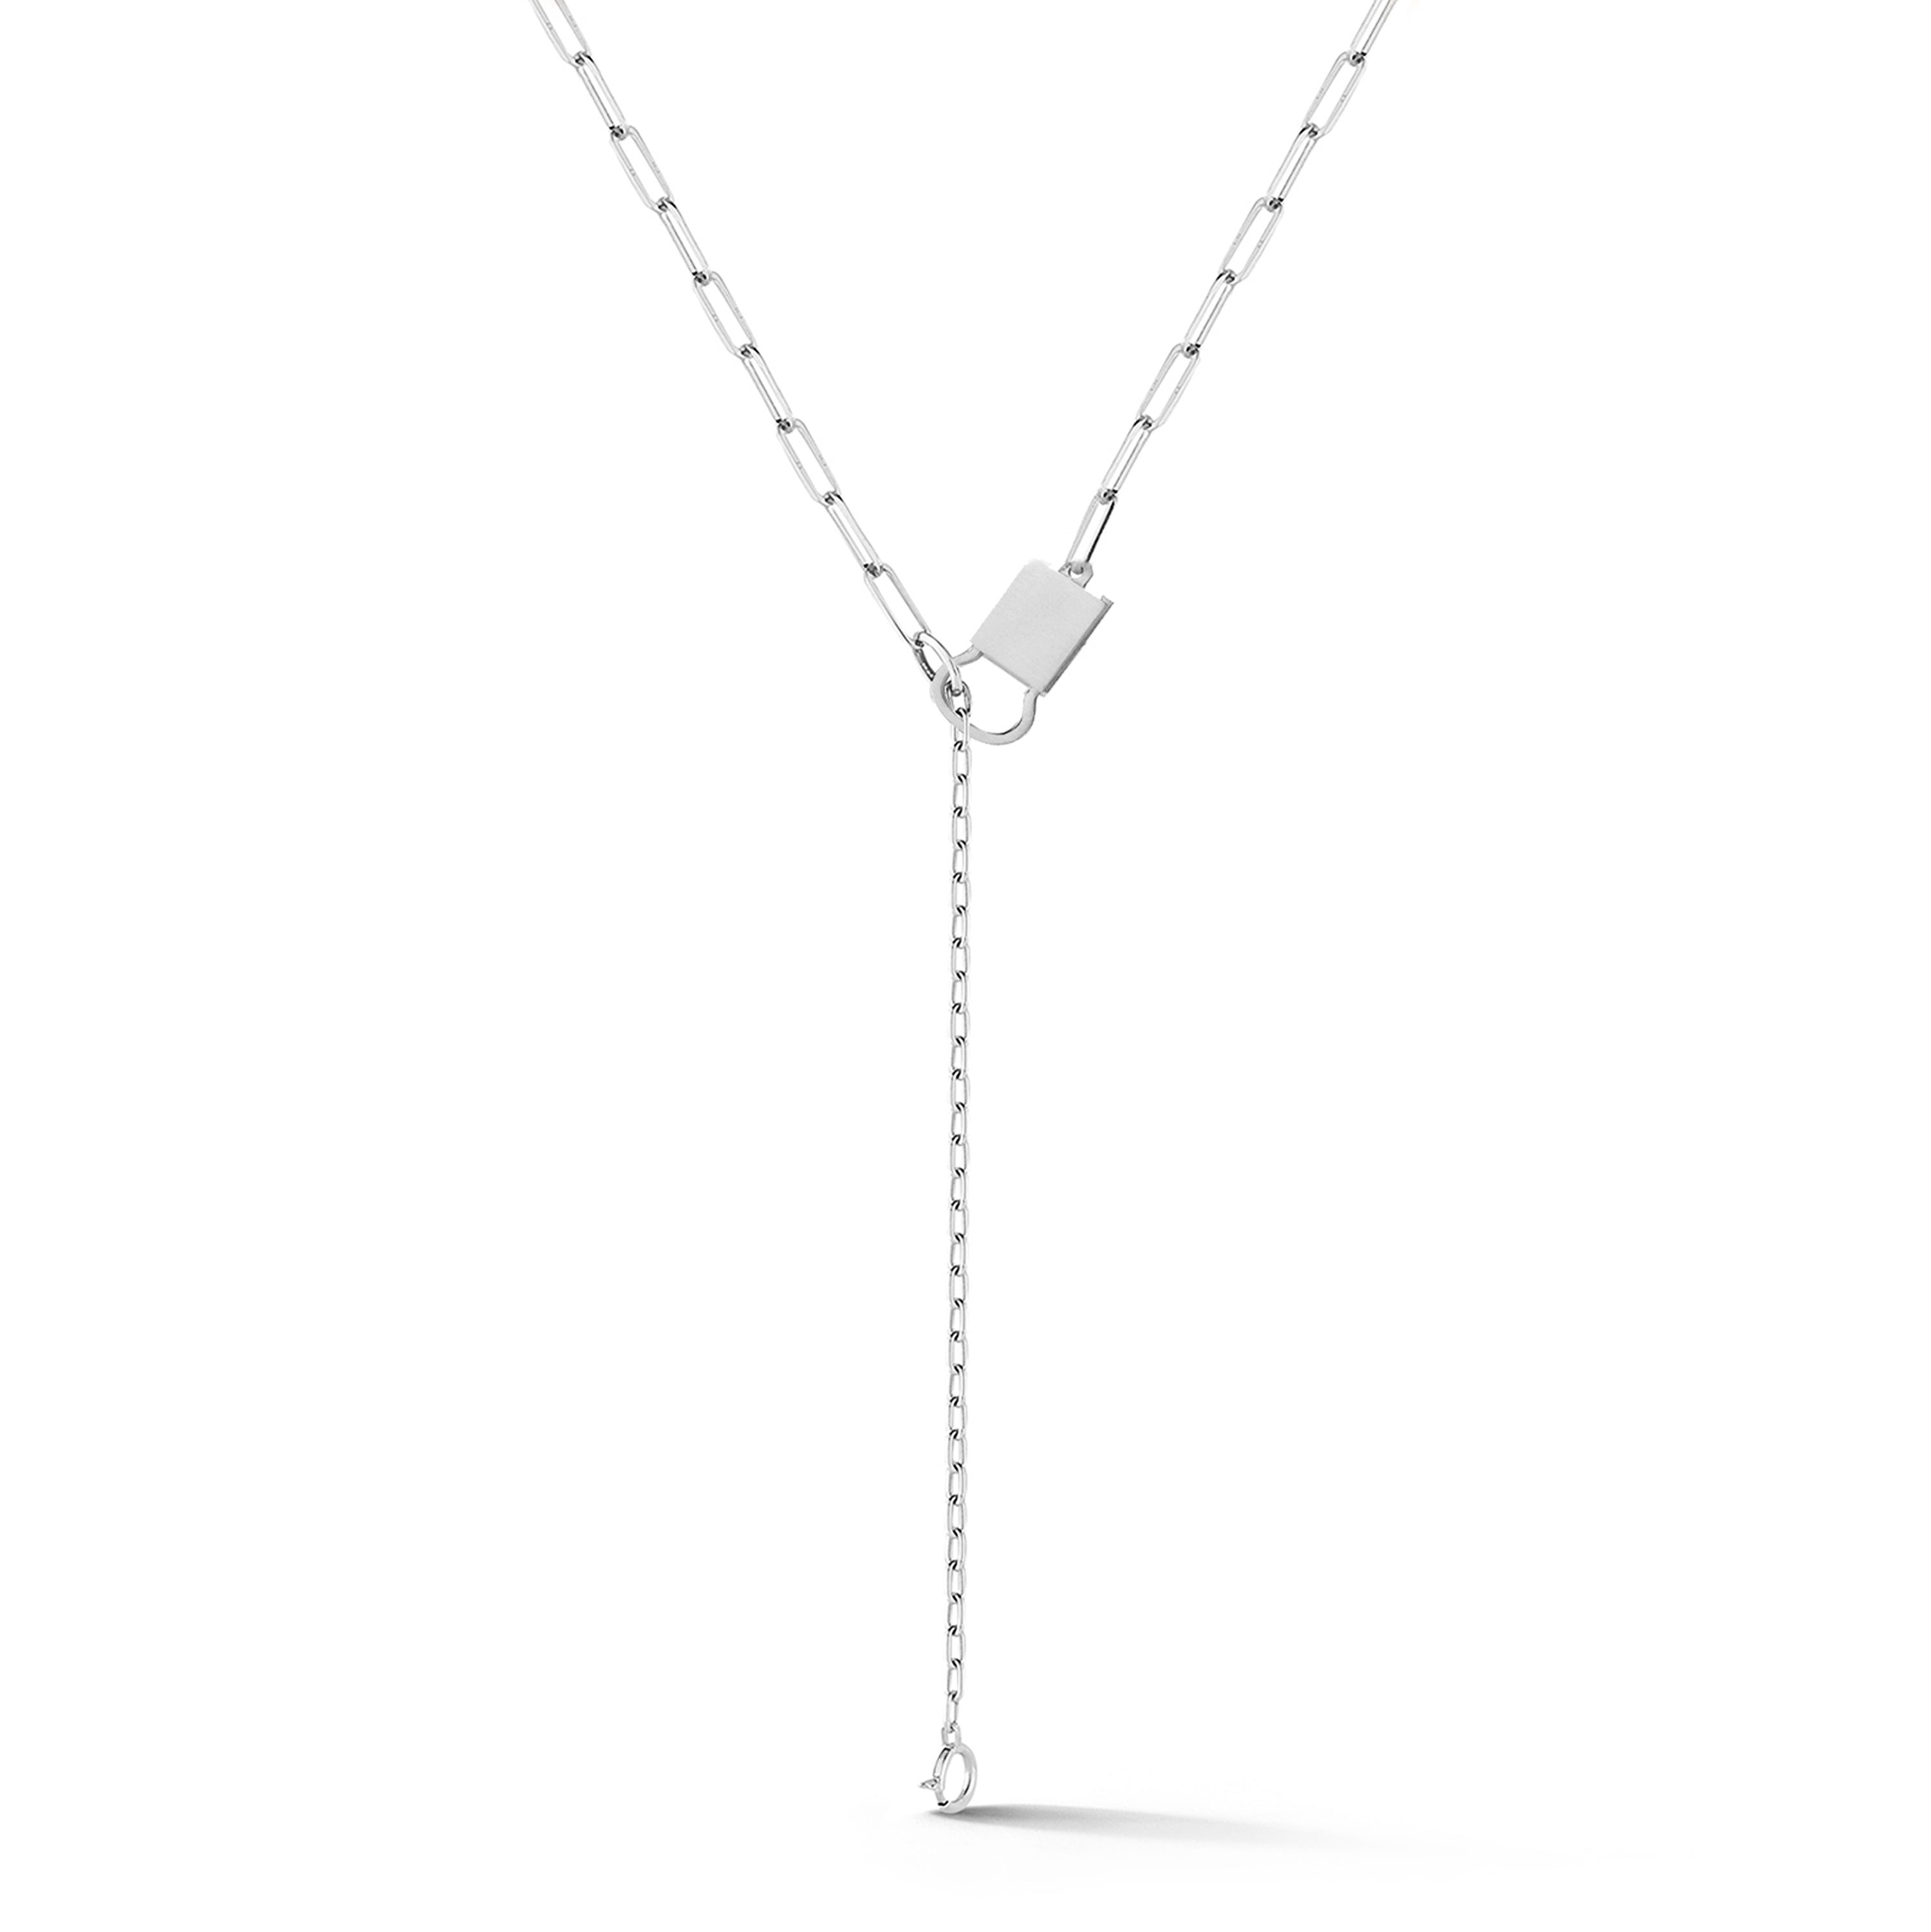 Betty Long Necklace in 18K White Gold